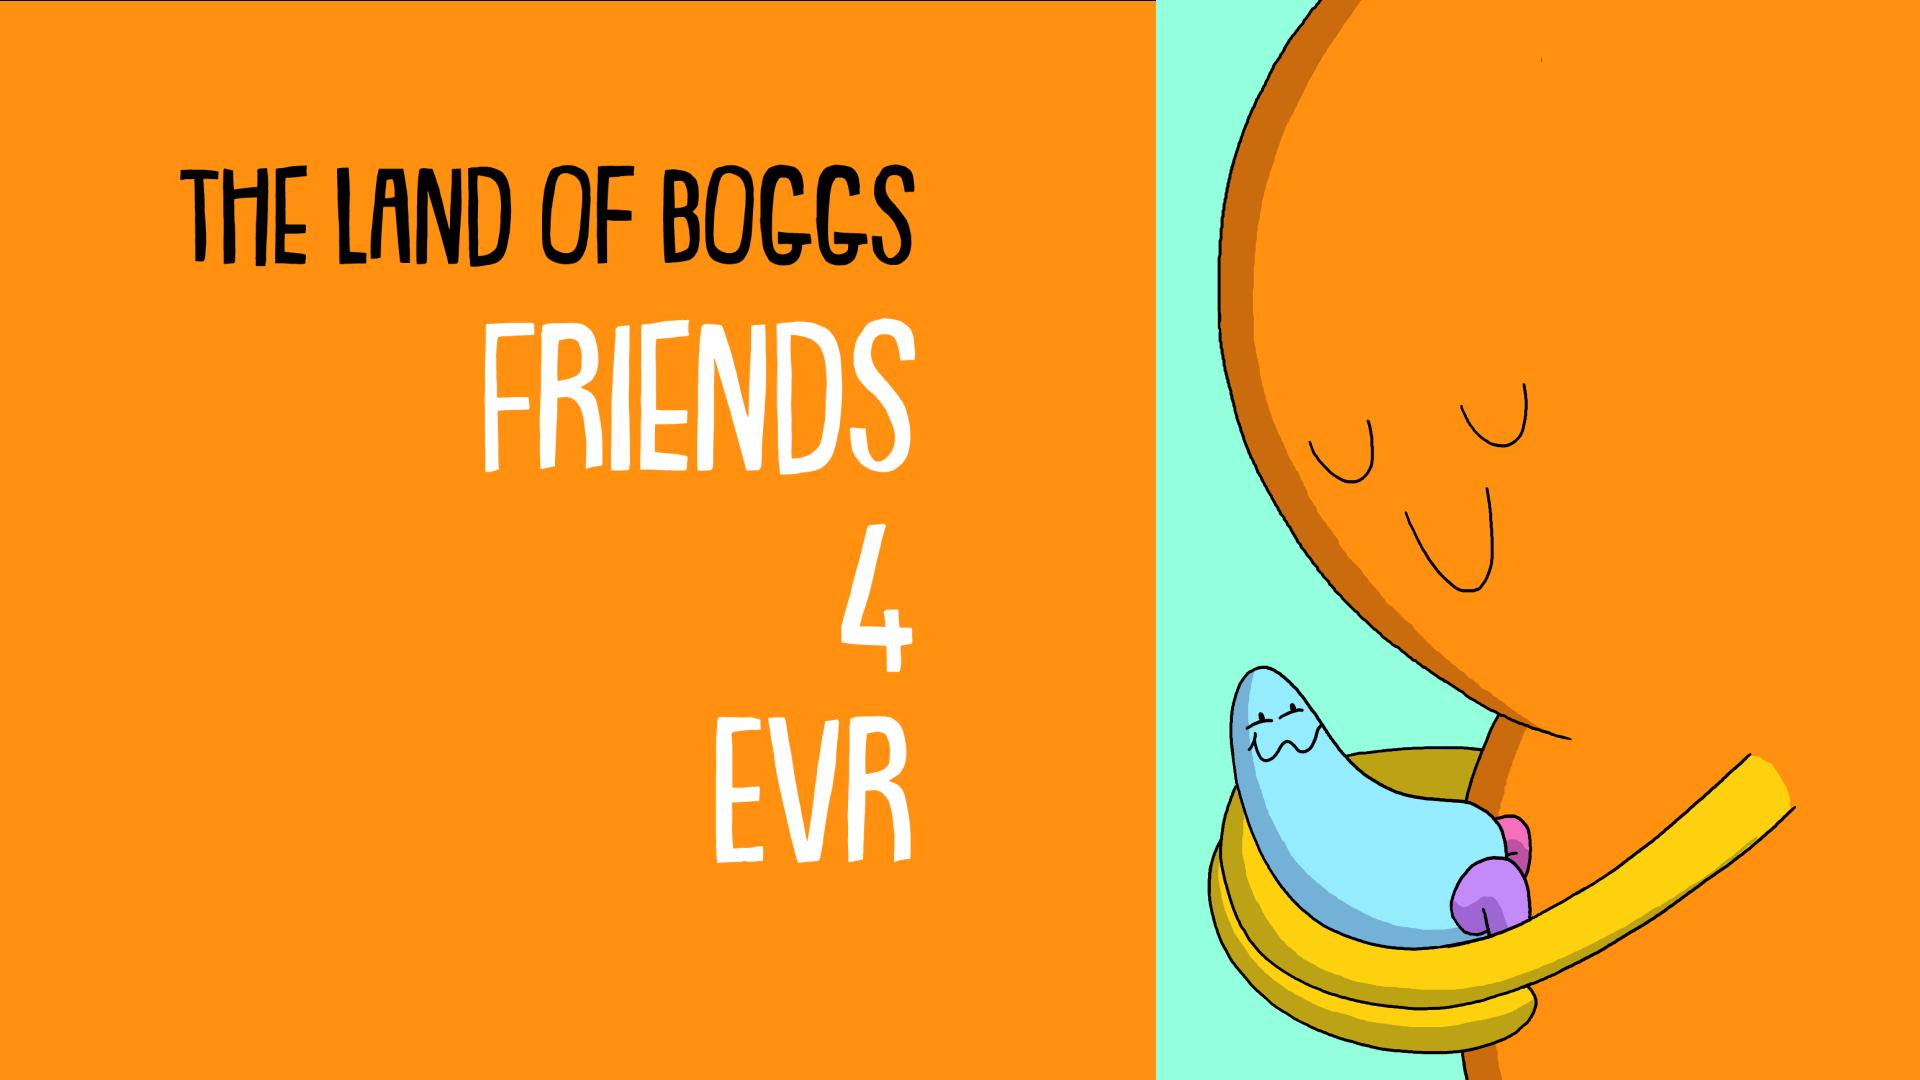 The Land of Boggs: Friends 4 Evr